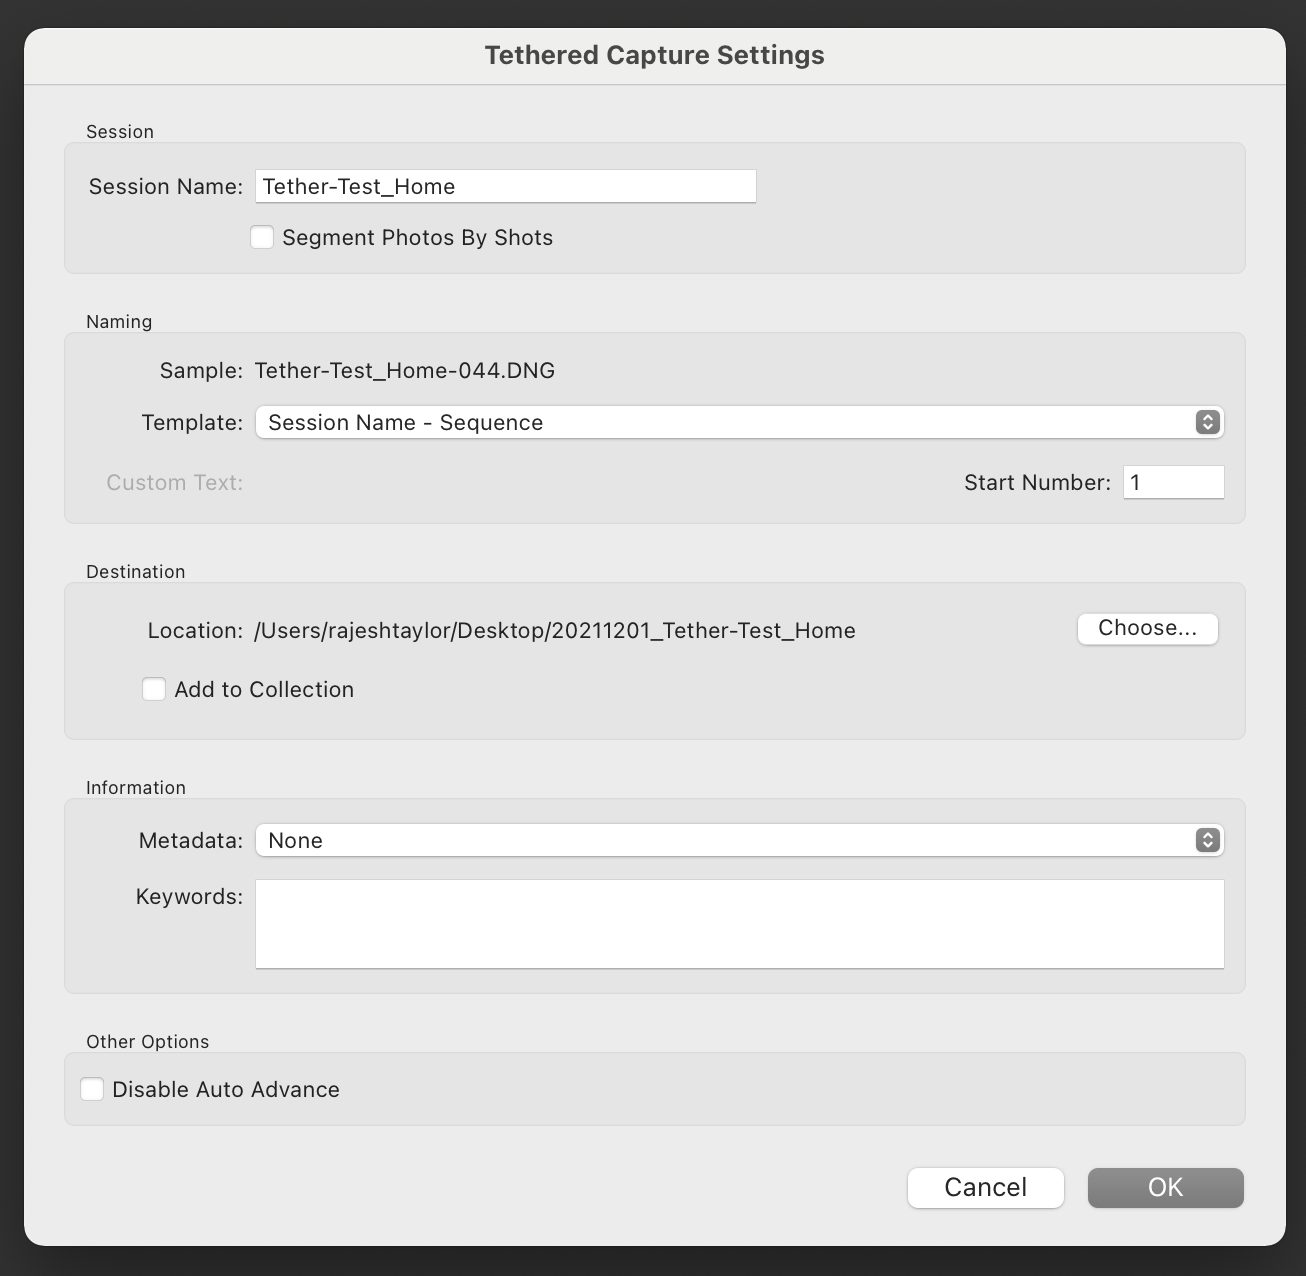 Tethered Capture Settings dialogue box in Lightroom Classic